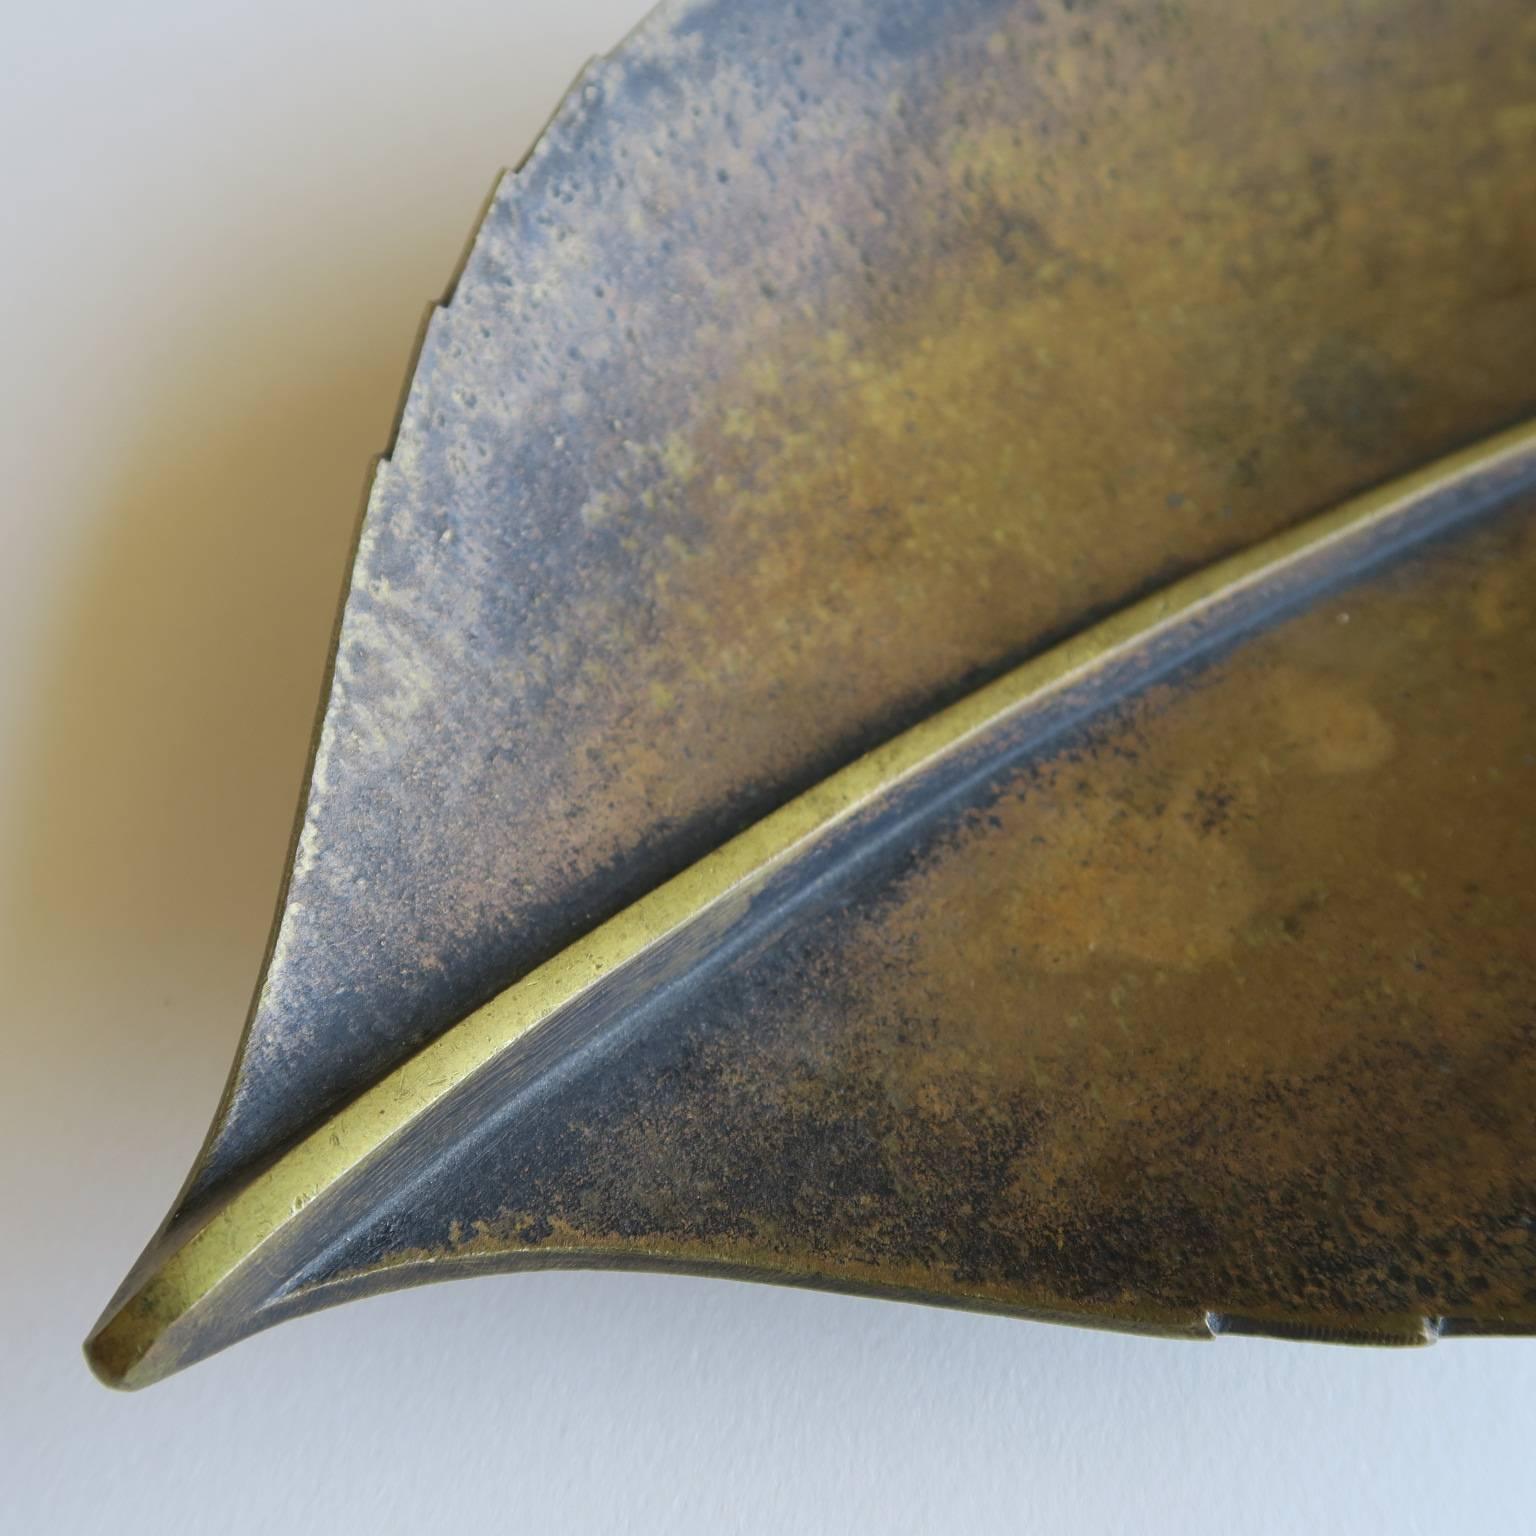 Exceptional solid brass object as a decorative dish or tray, sculpted in the form of a leaf, designed by Carl Auböck and made at the Werkstatte Auböck in Austria, 1930s, signed with impressed 'Auböck MADE IN AUSTRIA' mark. Measures: 1.5 high x